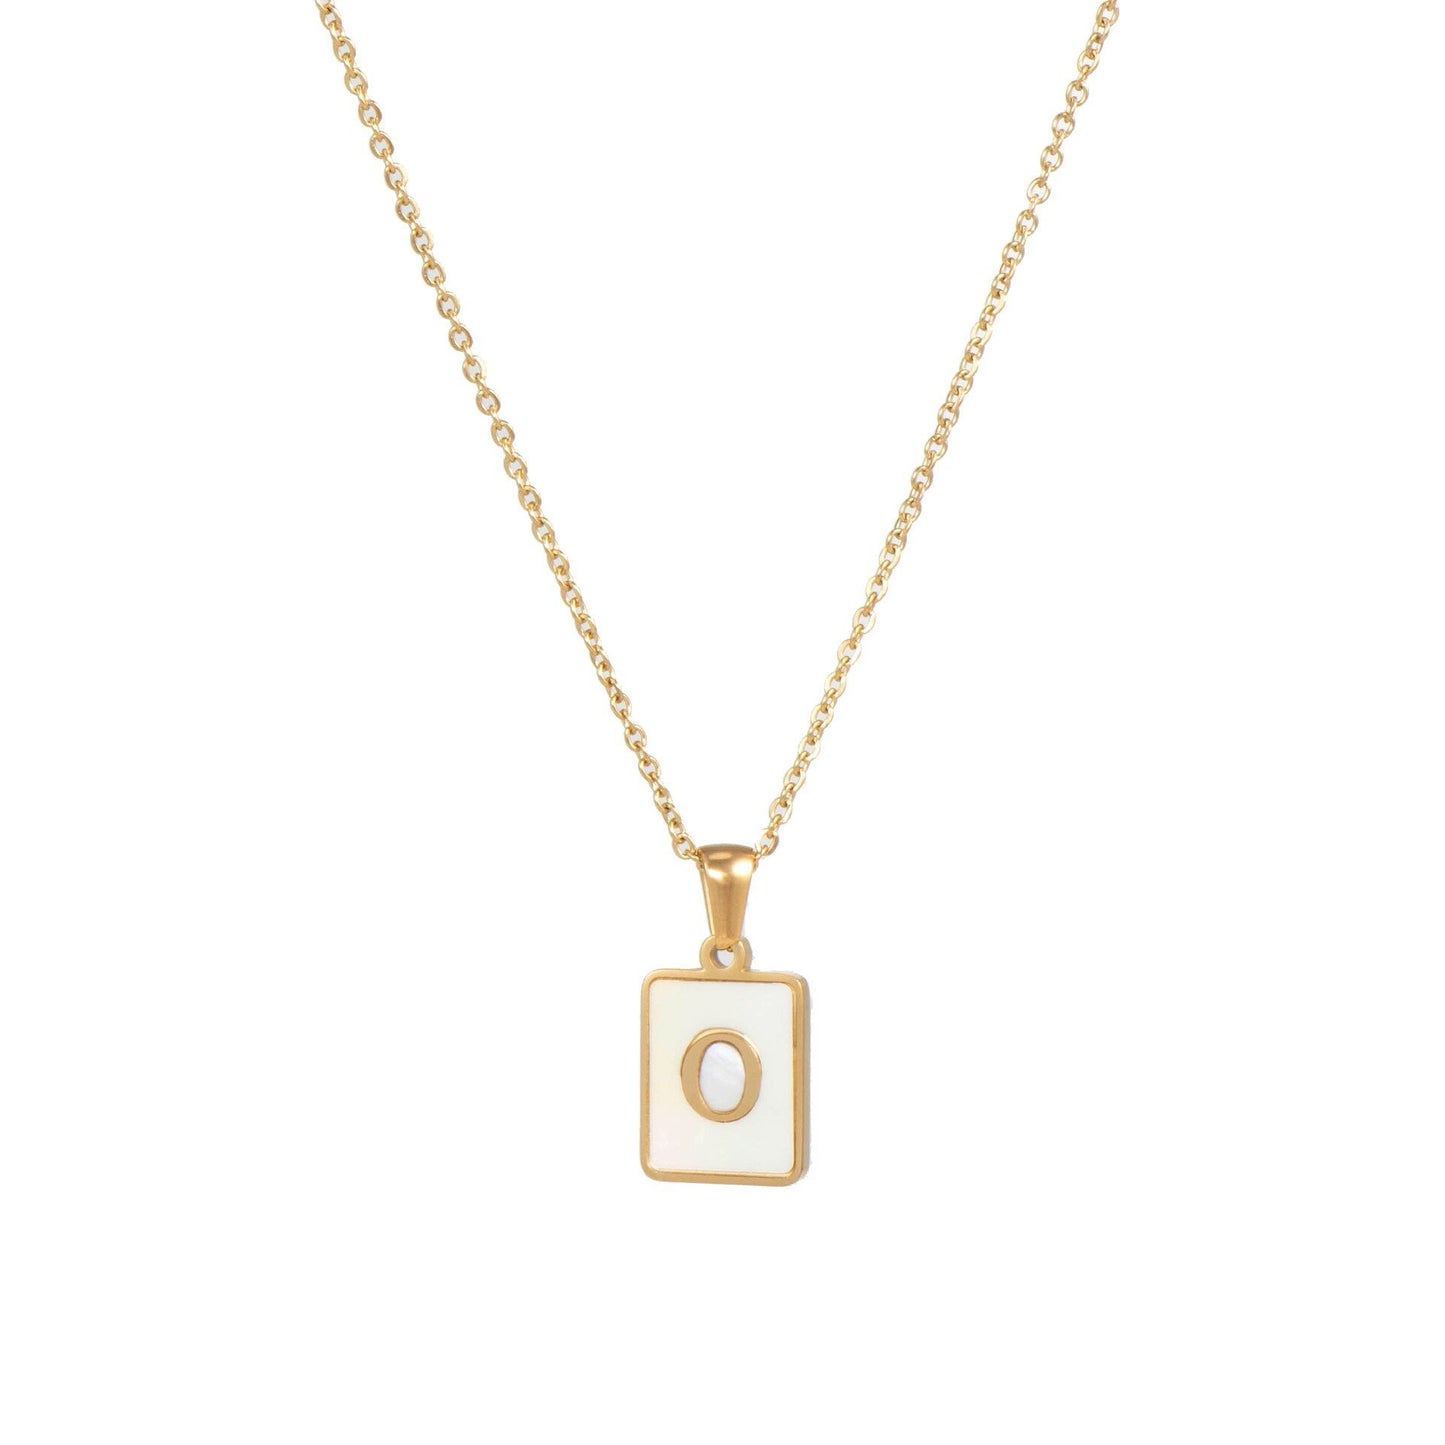 Gold Mother of Pearl Monogram Necklace, Letter O.